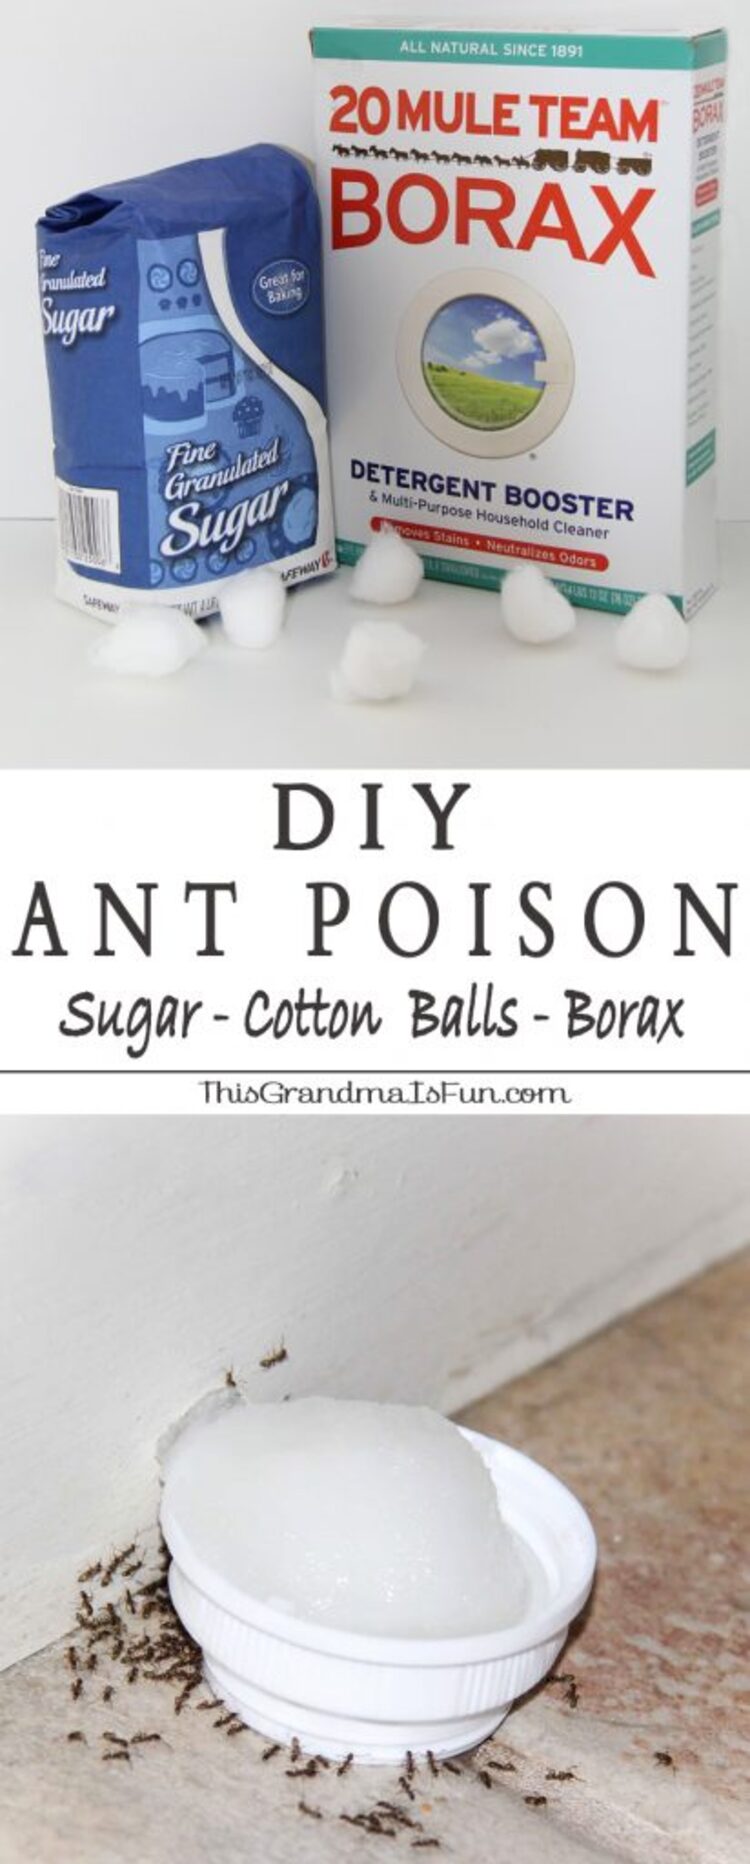 1 Poison Ant DIY Collage Image Box of Borax next to bog of sugar, bowl of homemade ant killer surrounded by ants